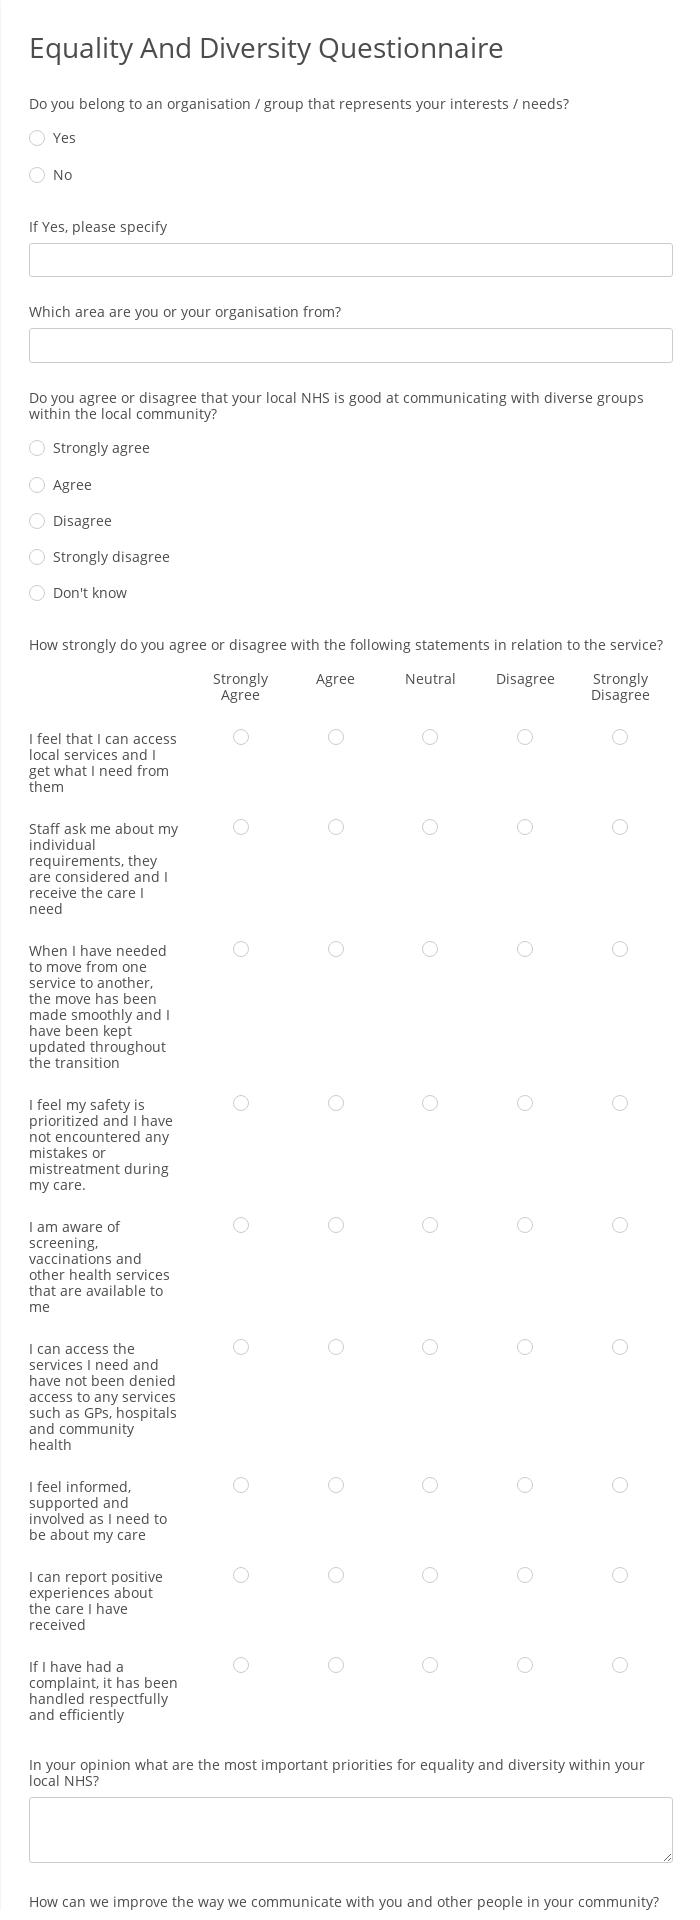 Equality And Diversity Questionnaire